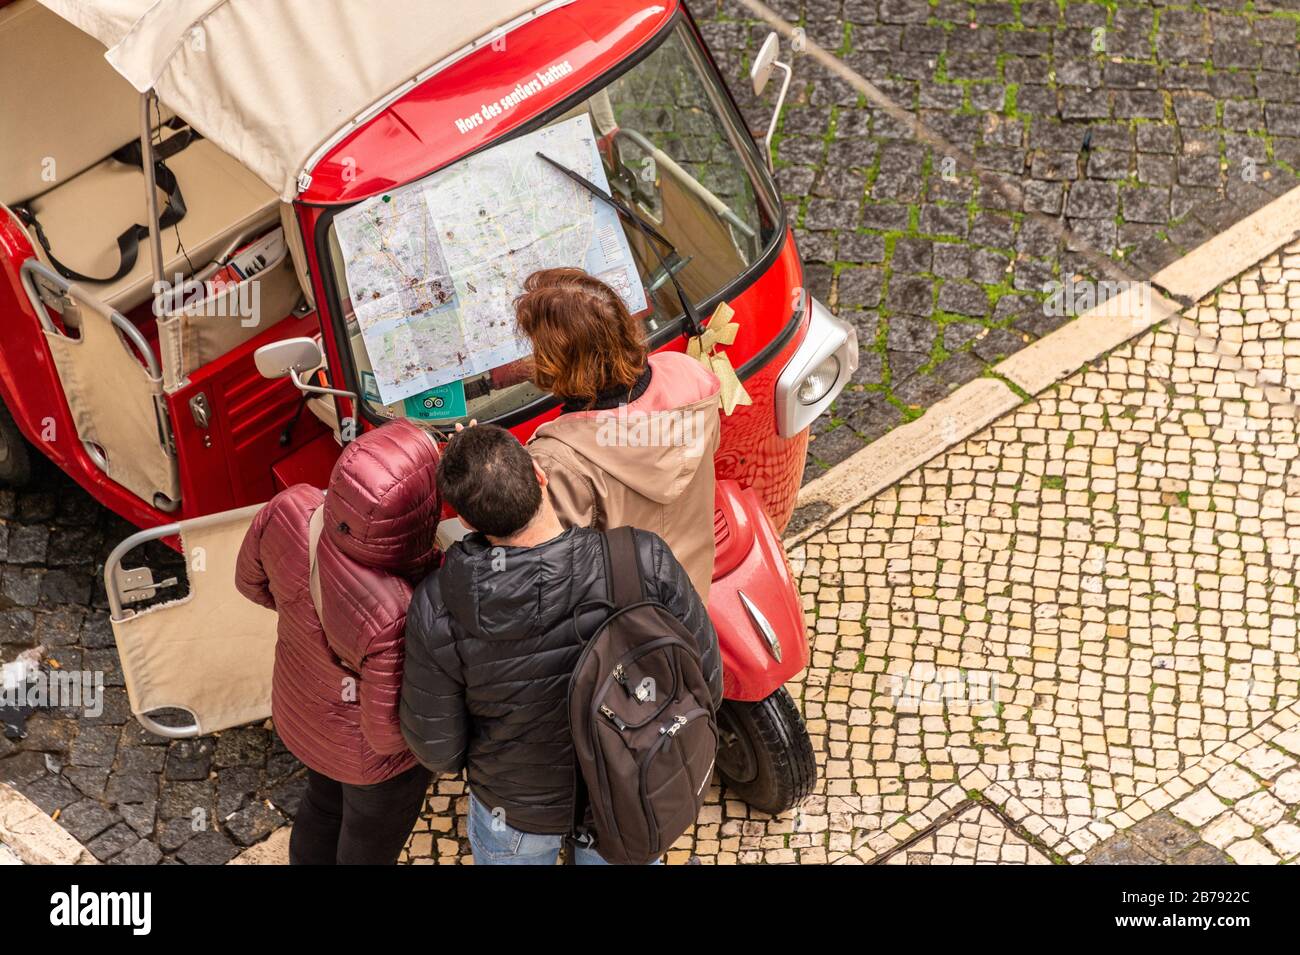 Lisbon, Portugal - 3 March 2020: Tour guide and tourists looking at Lisbon Map on Tuk Tuk windshield Stock Photo